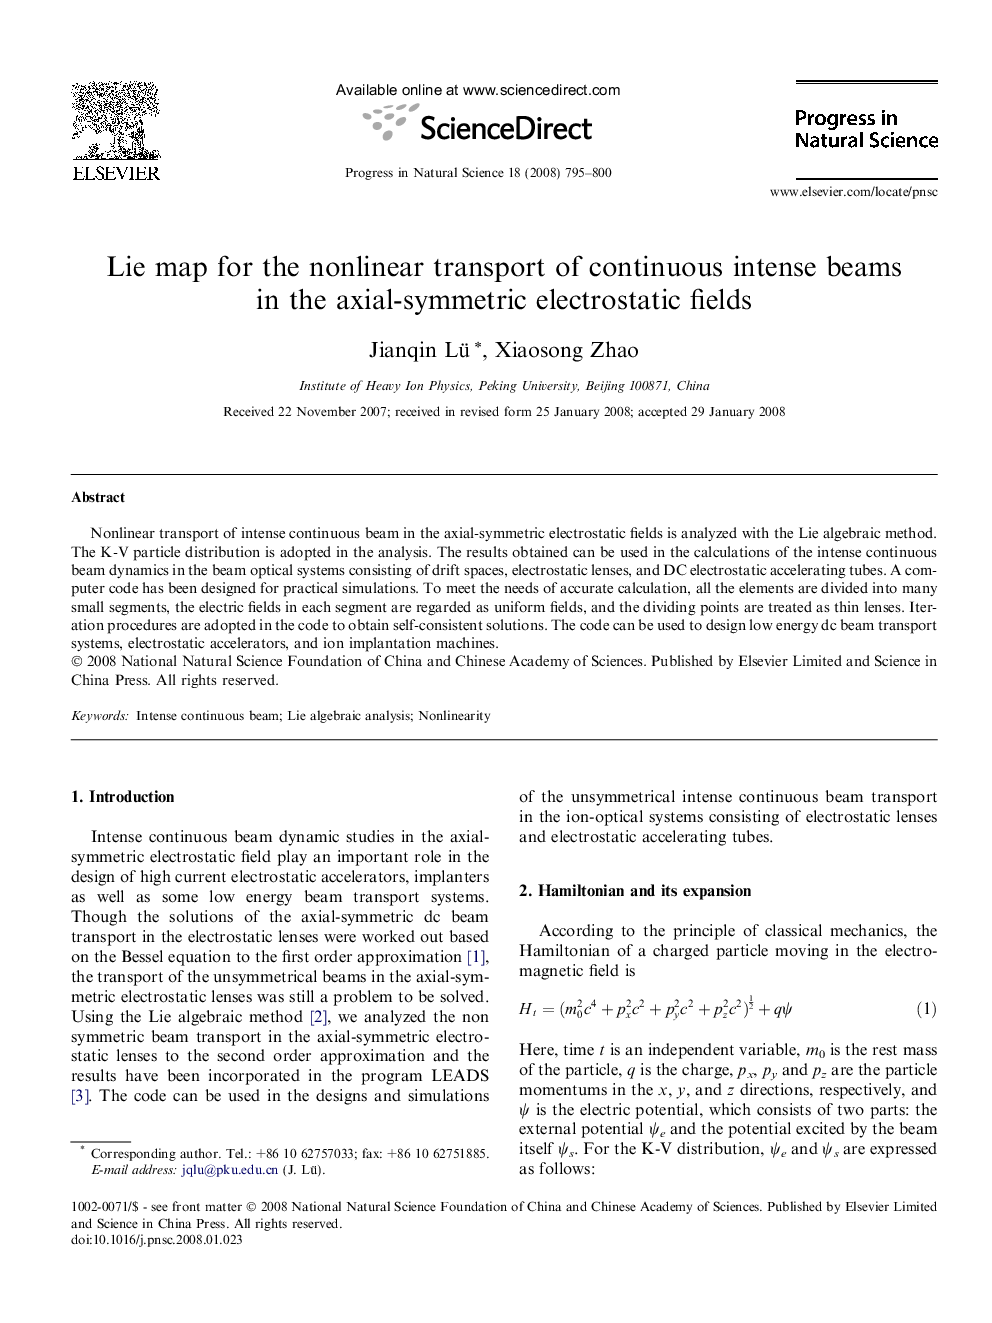 Lie map for the nonlinear transport of continuous intense beams in the axial-symmetric electrostatic fields